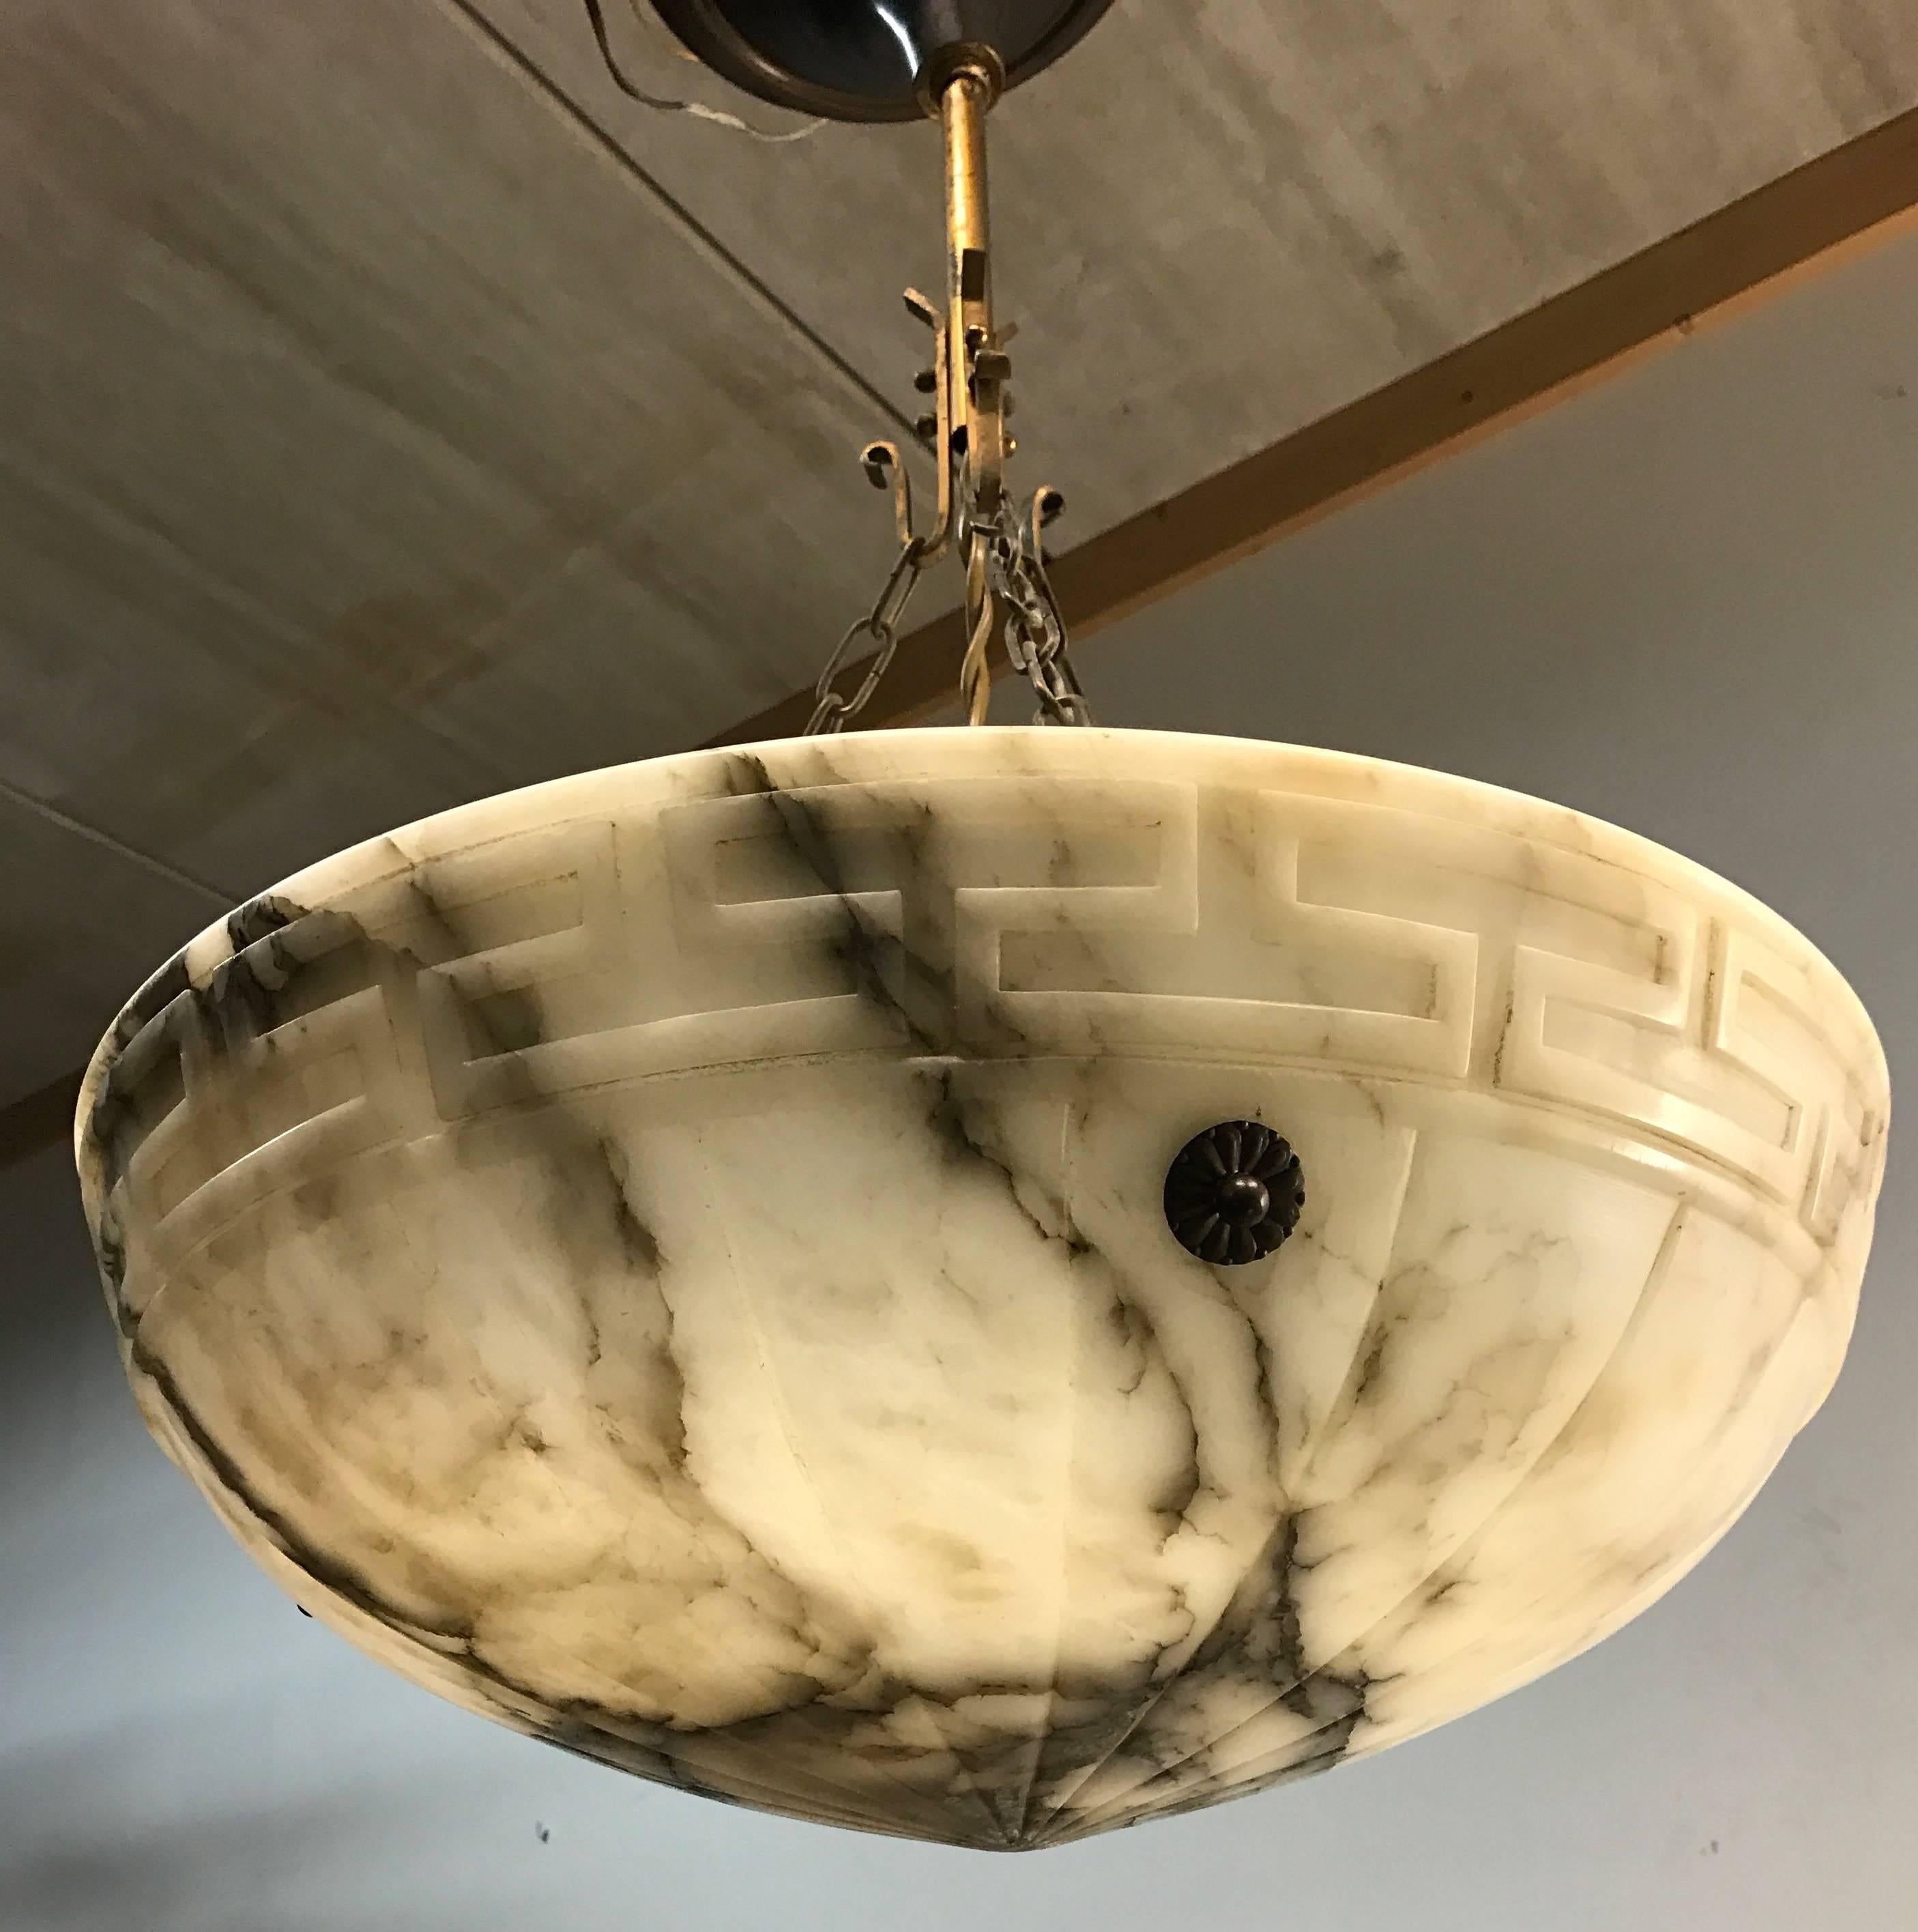 Good size, good quality and great value for money. 

This early 20th century alabaster pendant comes with brass chain and ceiling cap. The shape, the color and the effect of the veins in this beautiful natural mineral stone make this pendant a joy